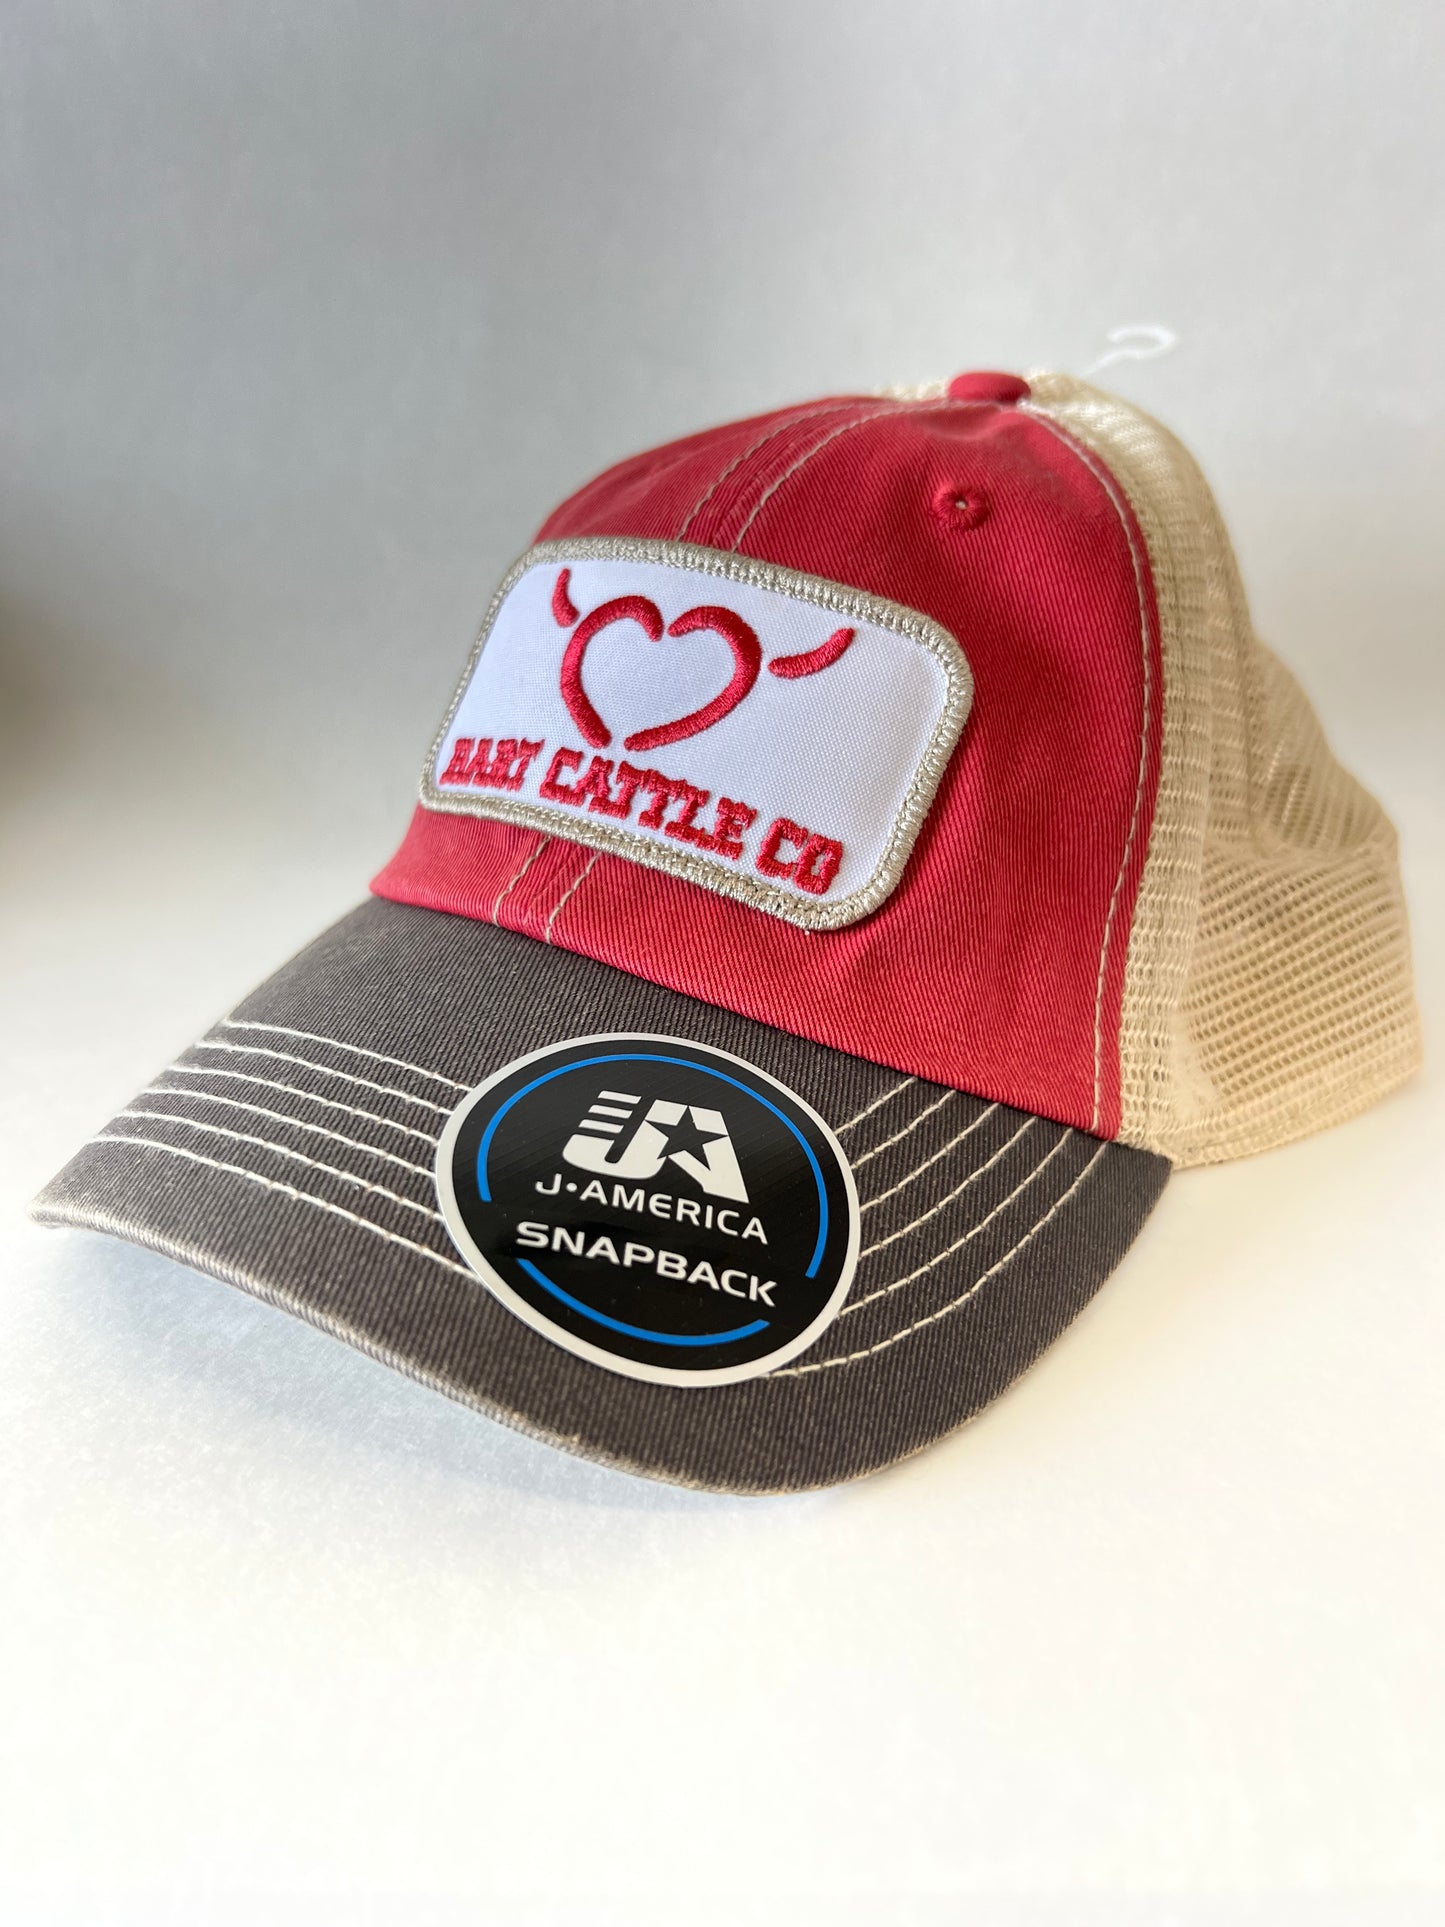 Hart Cattle Co. Red distressed Women's hat